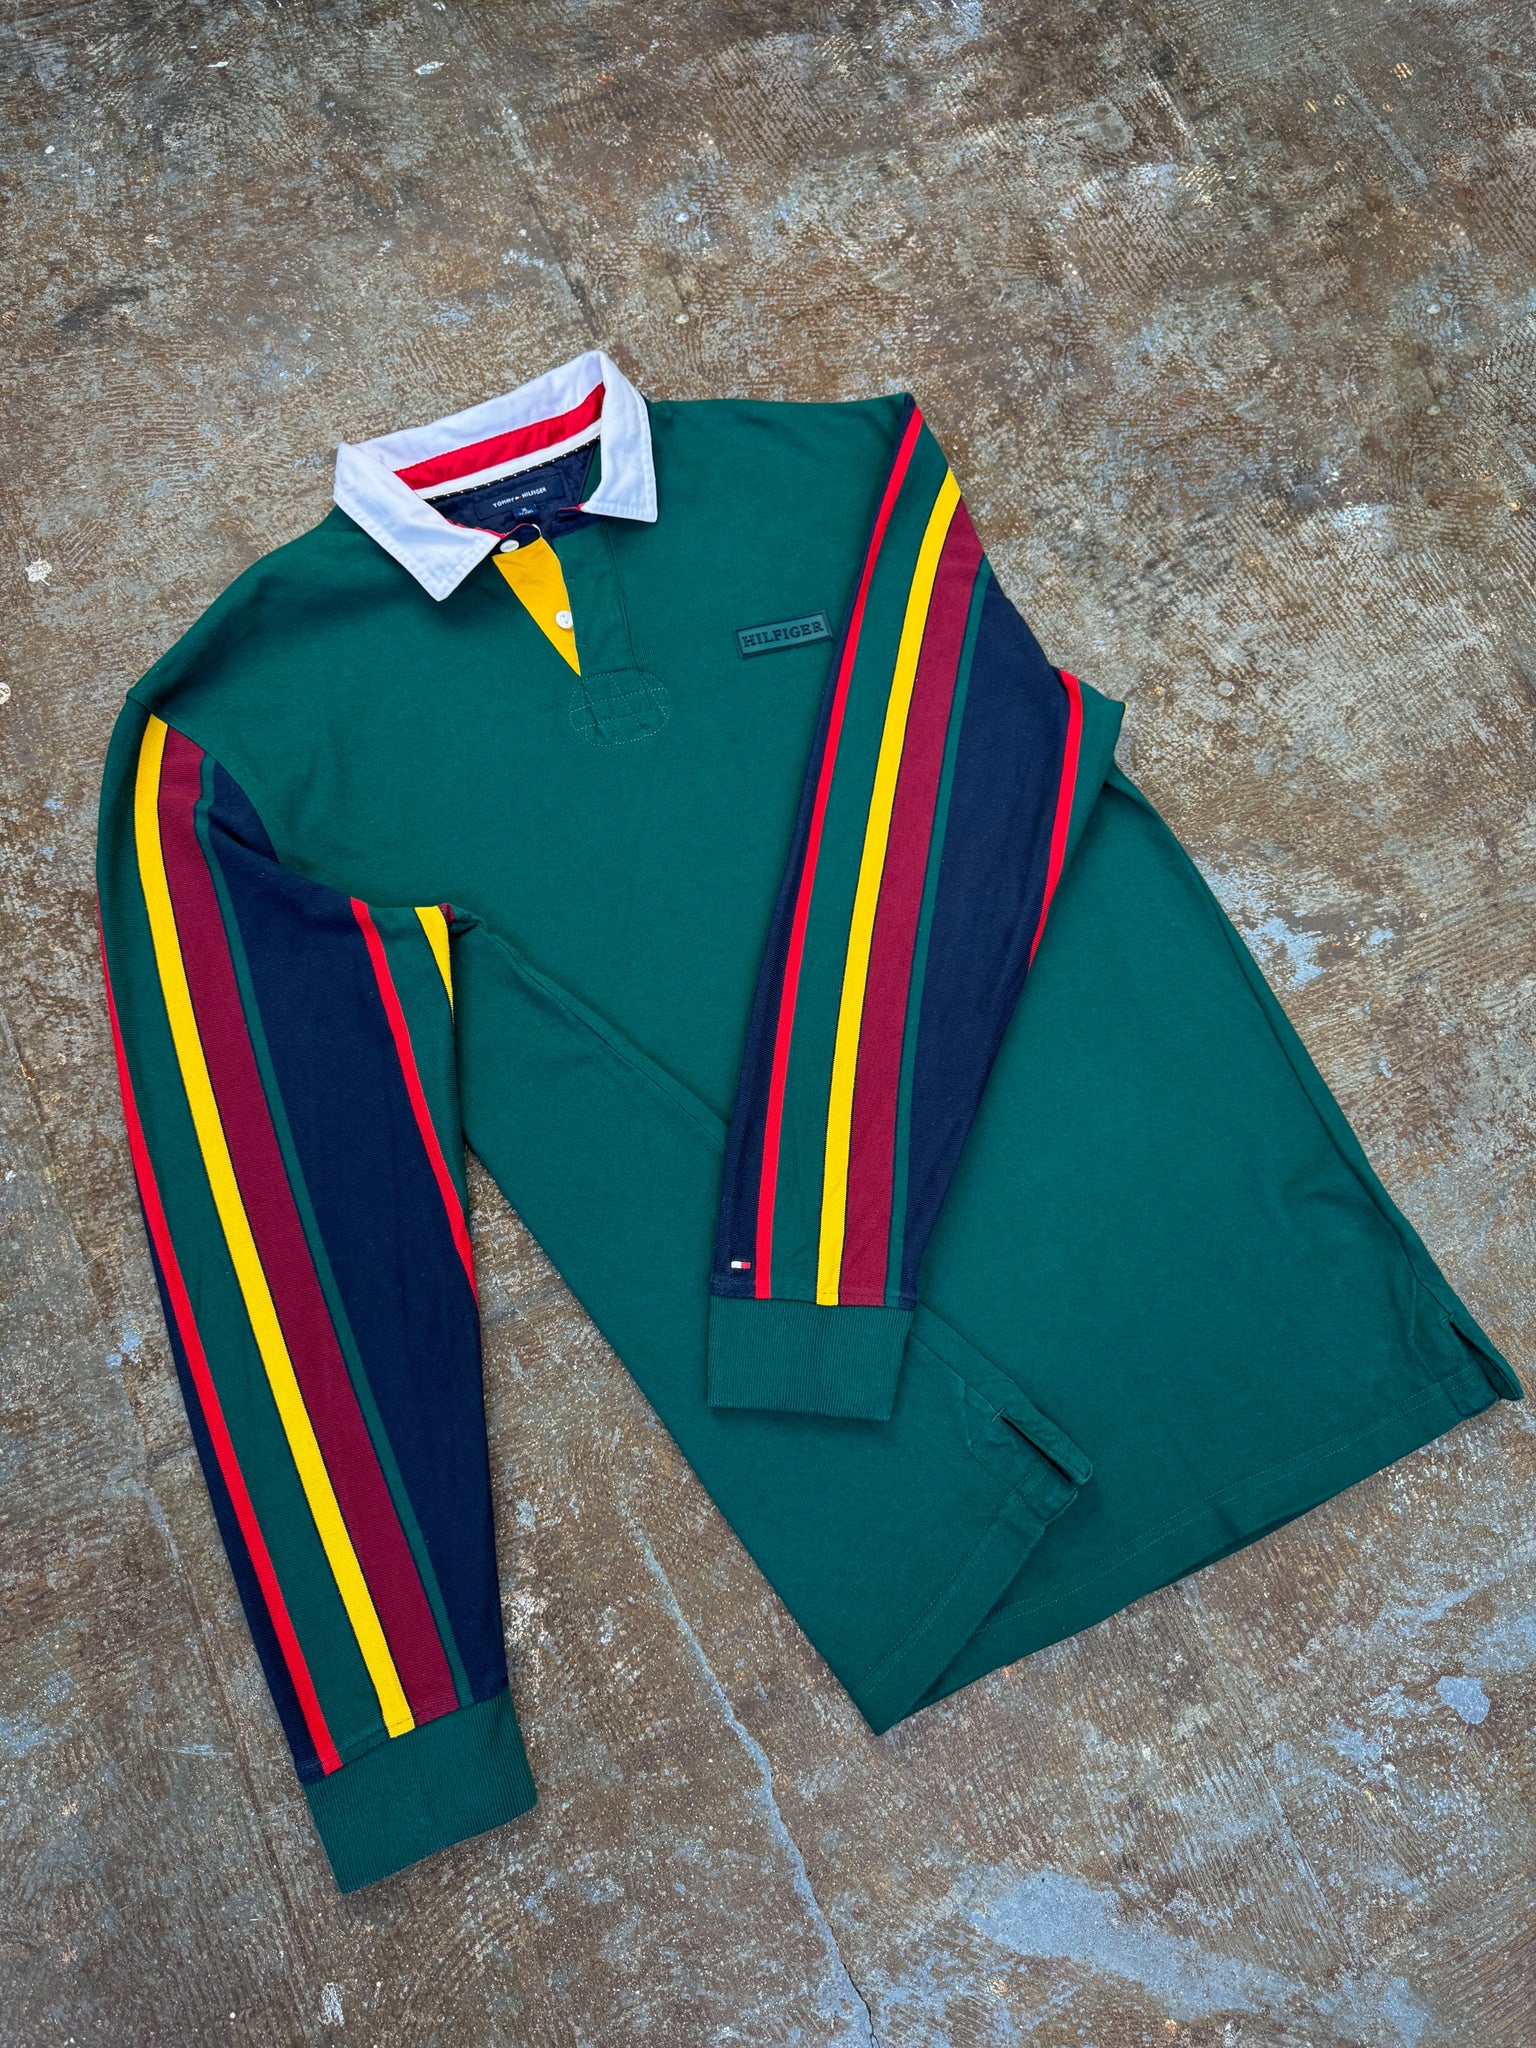 TOMMY HILFIGER RUGBY SHIRT